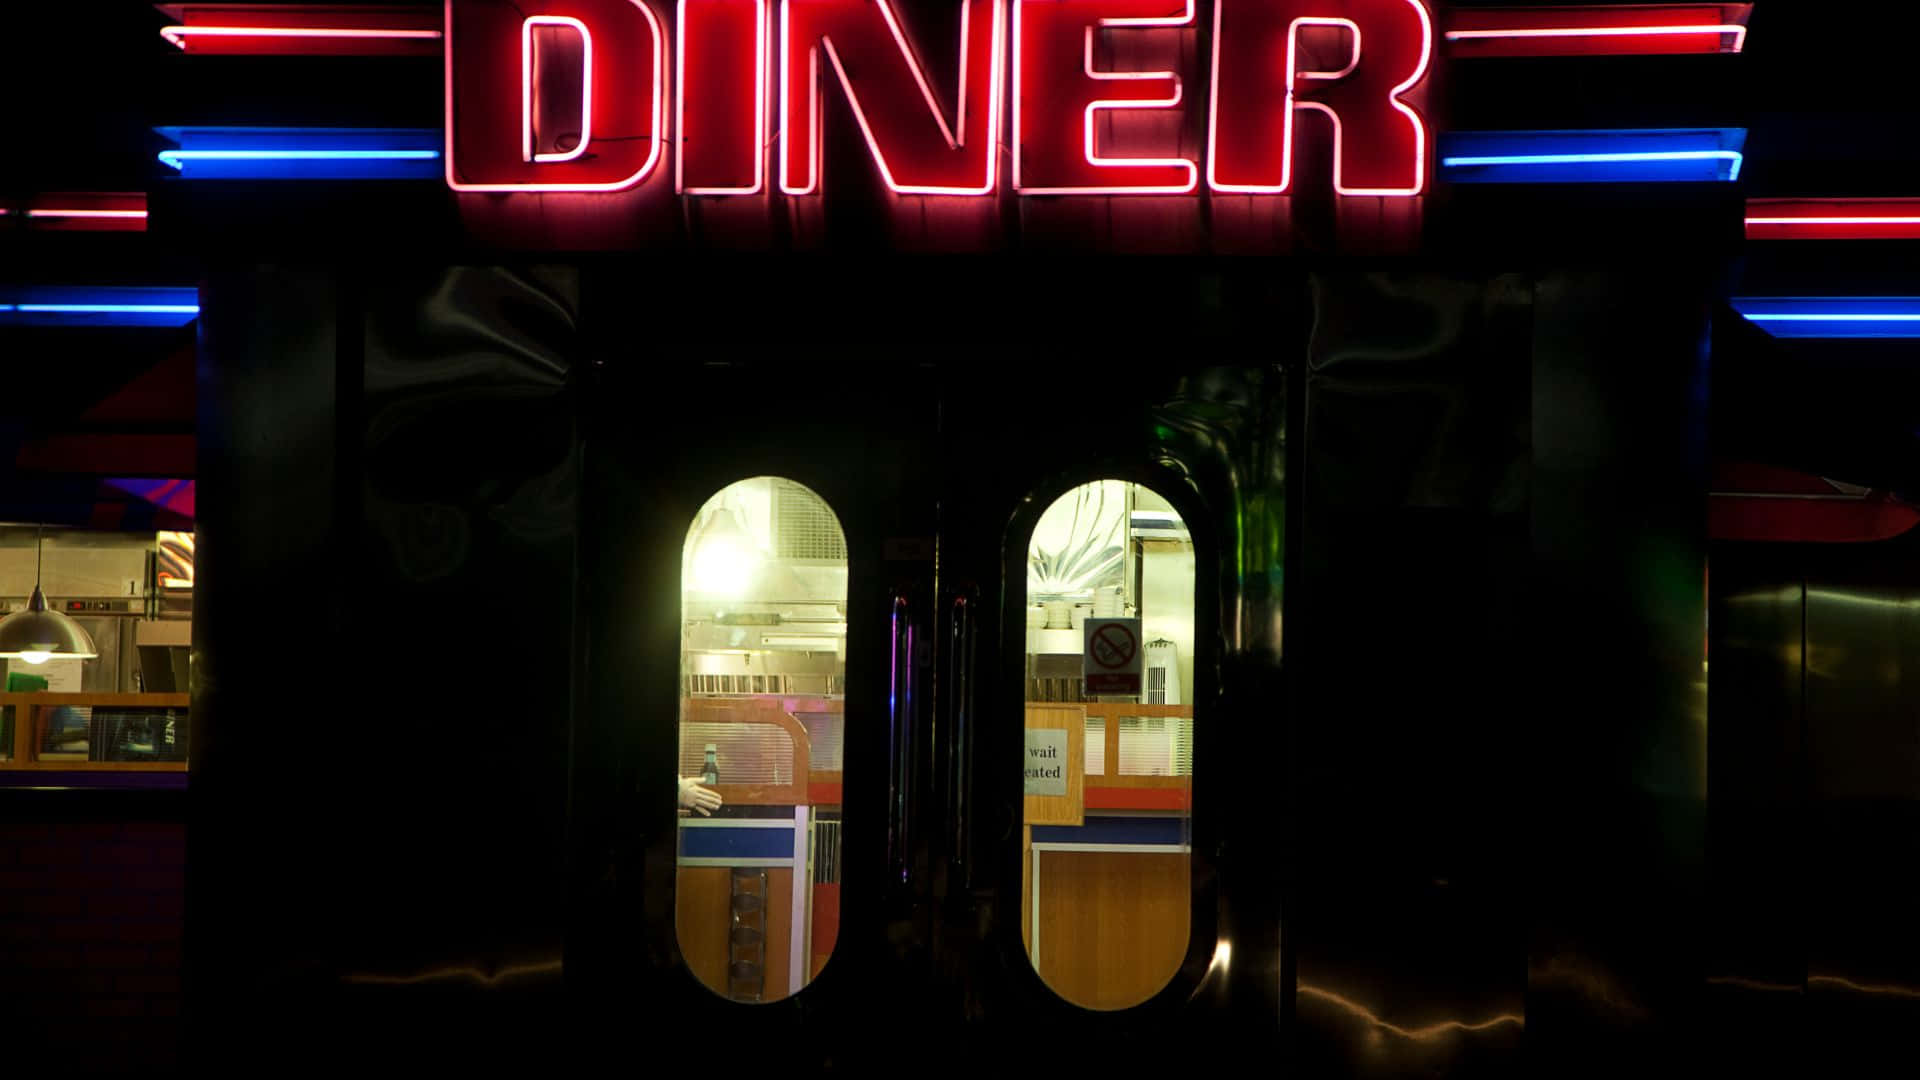 Caption: Vintage American Diner in the Evening